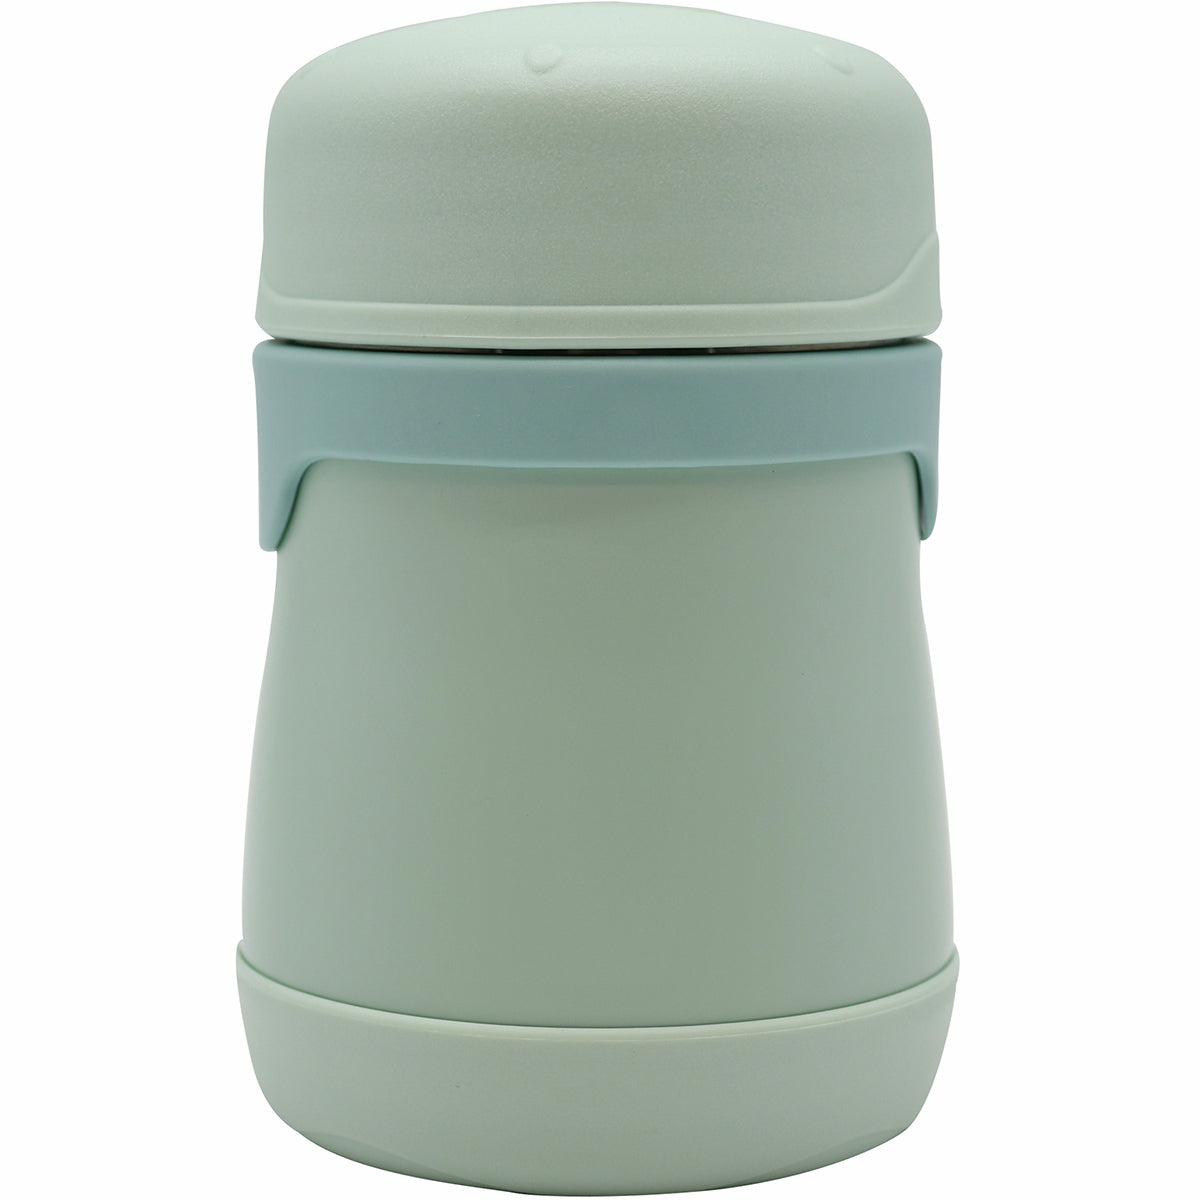 Thermos Baby 7 oz. Vacuum Insulated Stainless Steel Food Jar Thermos